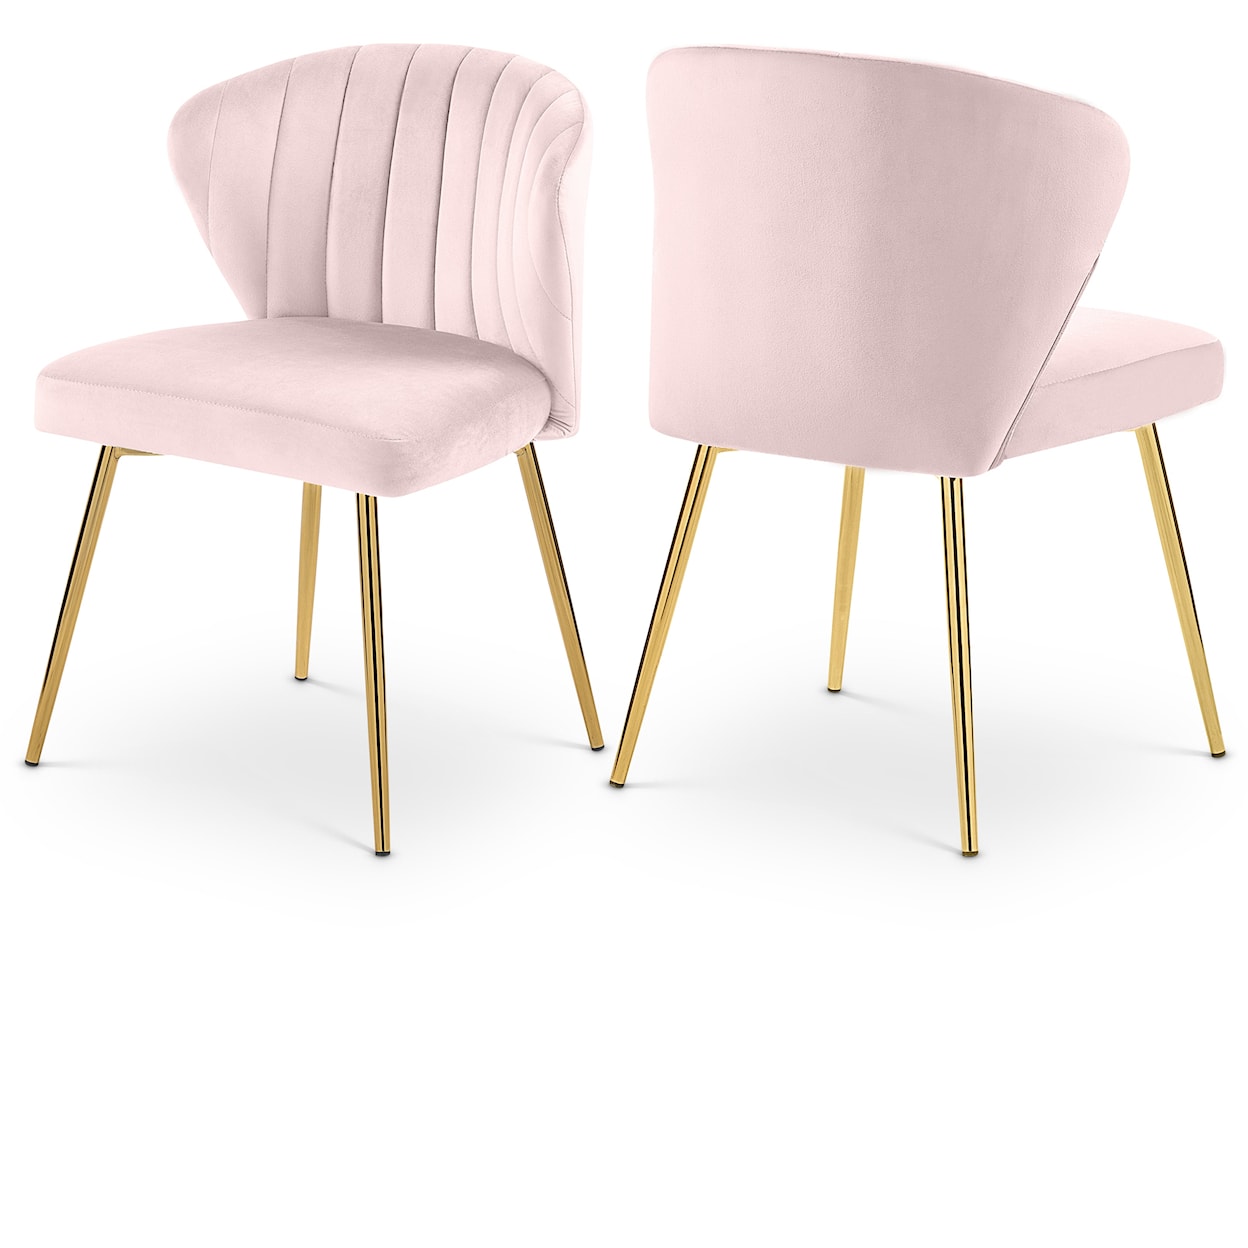 Meridian Furniture Finley Pink Velvet Dining Chair with Gold Legs